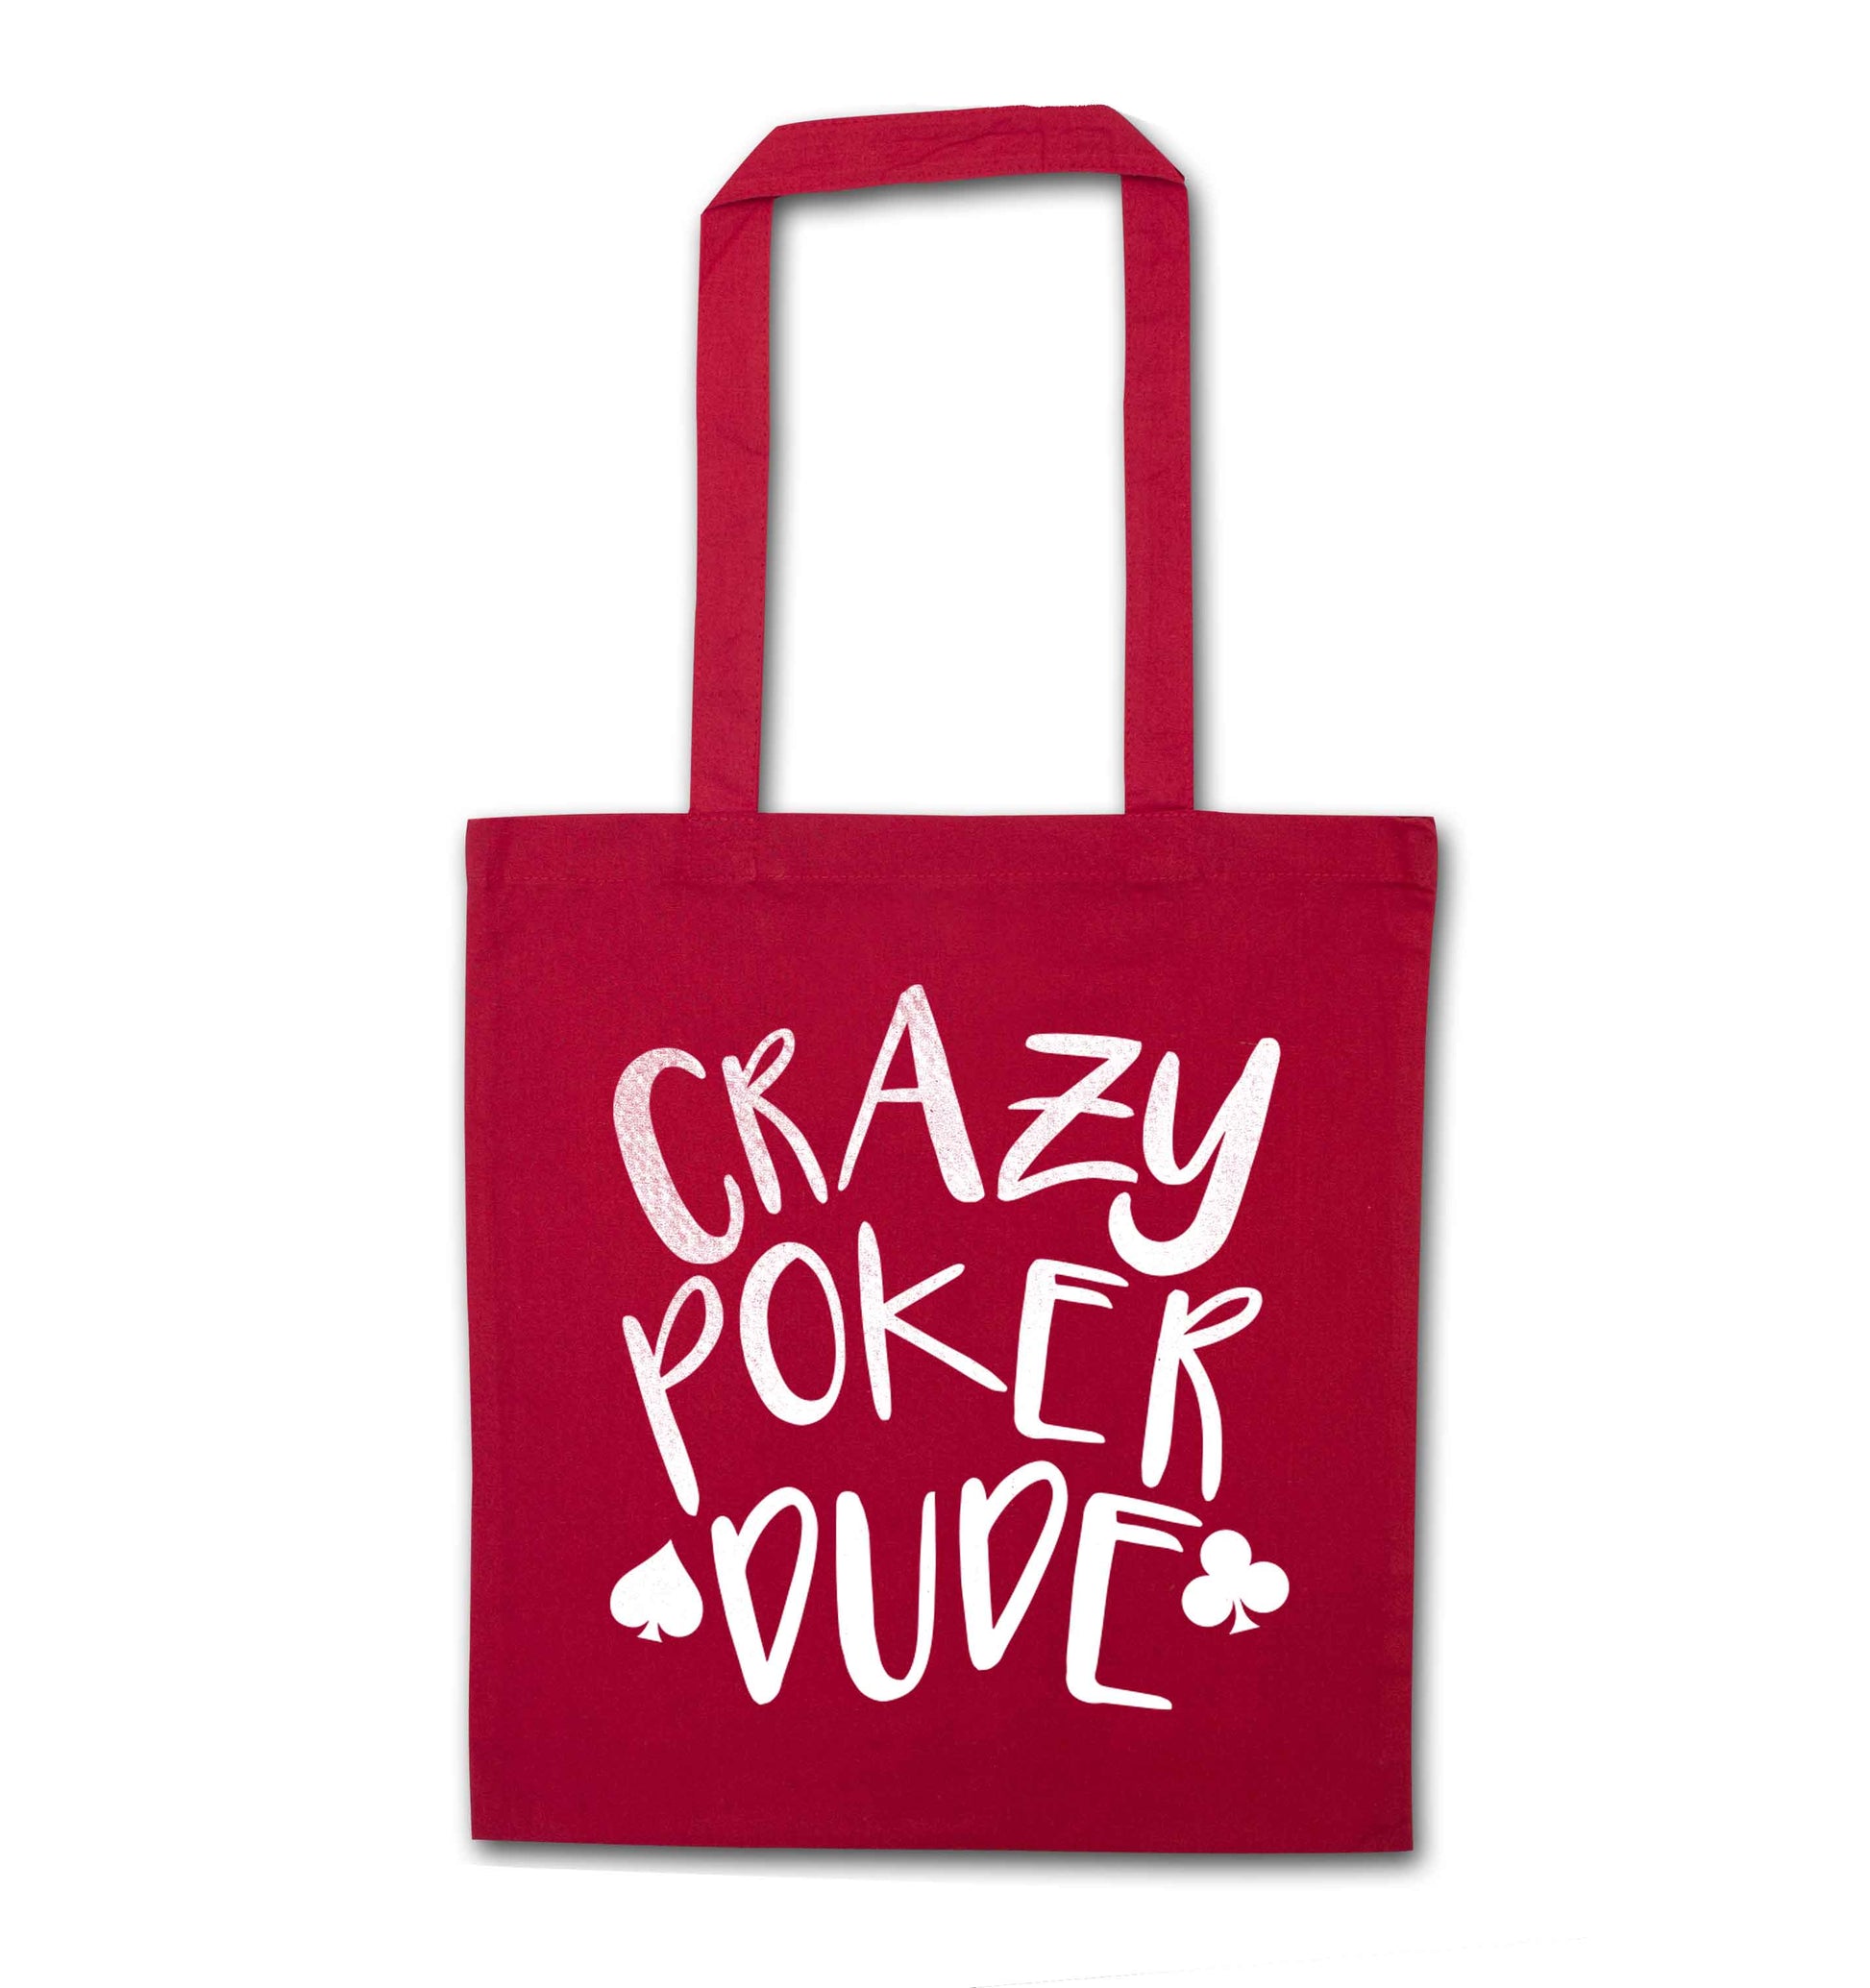 Crazy poker dude red tote bag